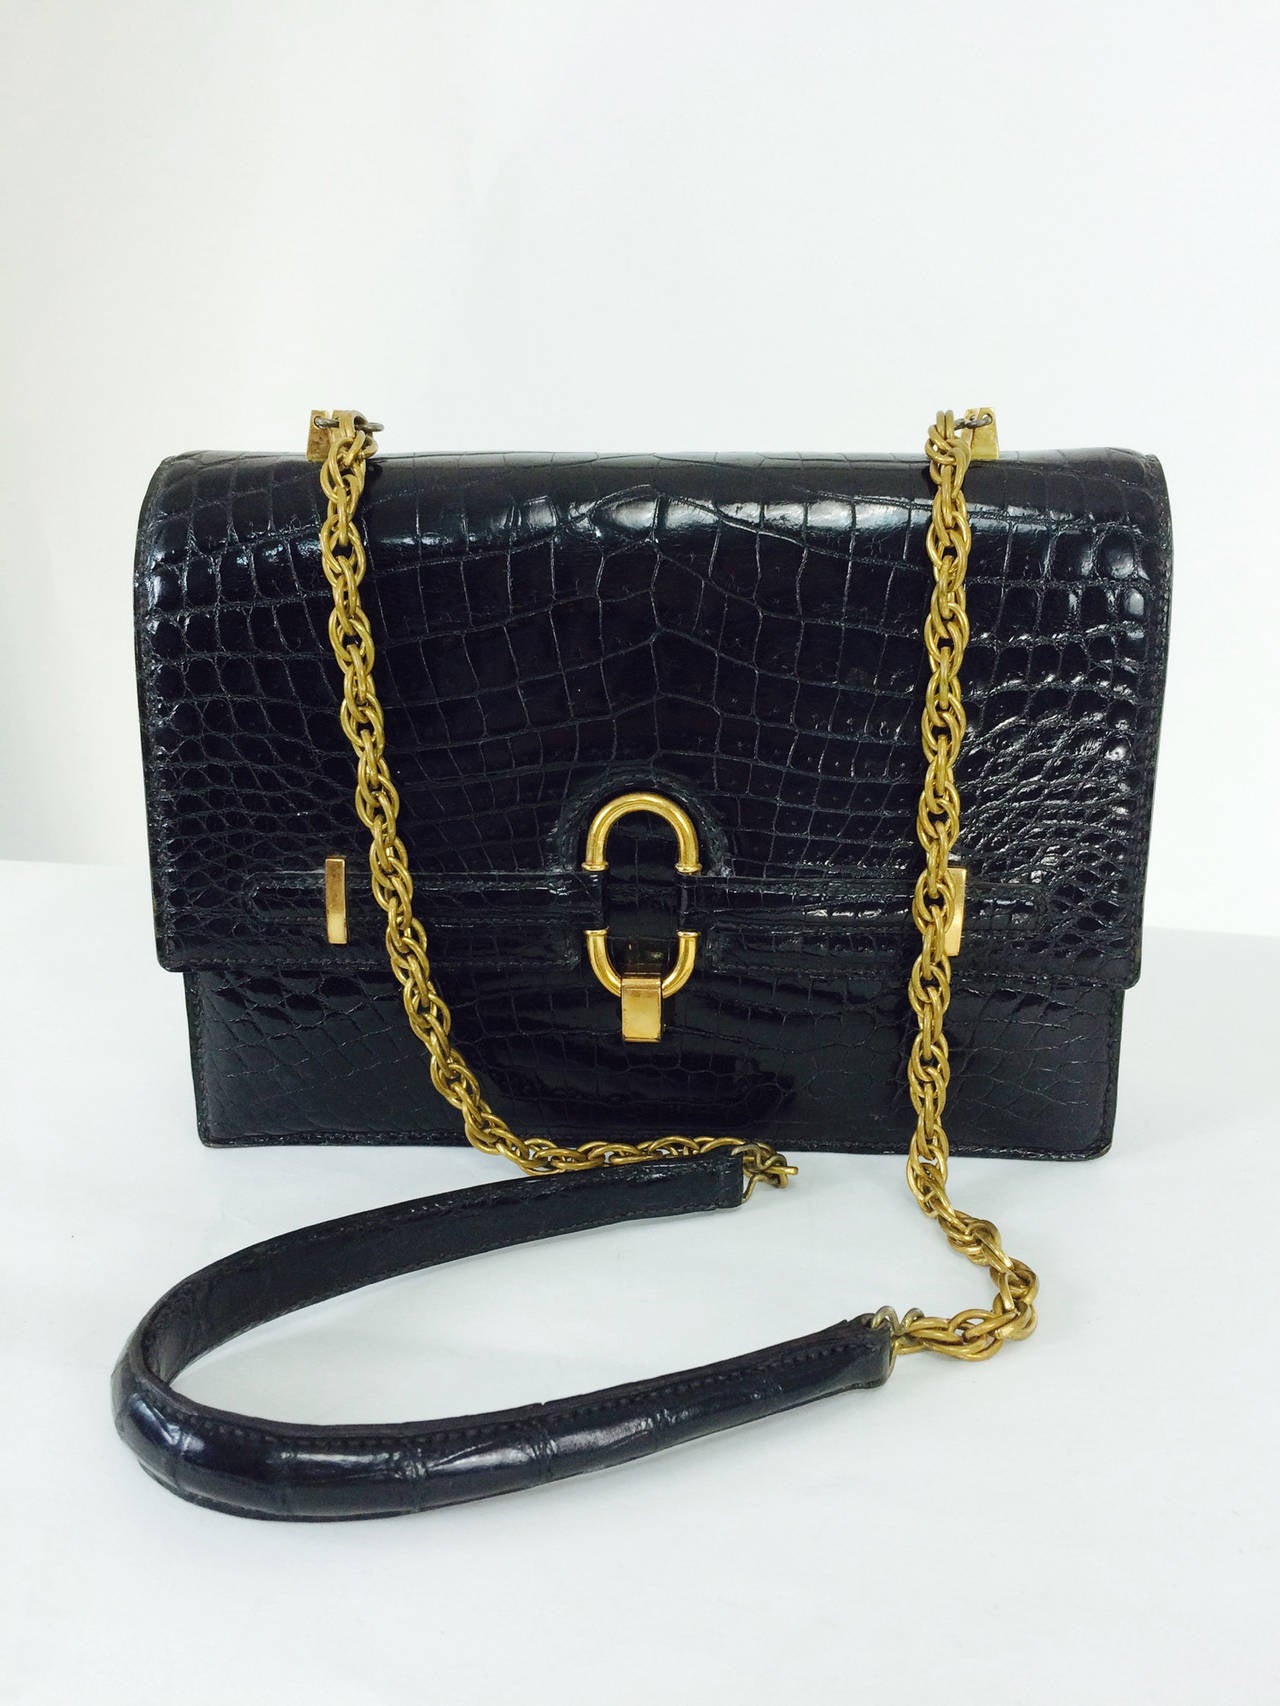 Crocodile shoulder bag with glazed black skins & gold plated hardware purchased in France in the 1970s...Beautiful and well made bag is fully lined in buttery soft black leather...With an unusual chain and crocodile strap...
The interior has a